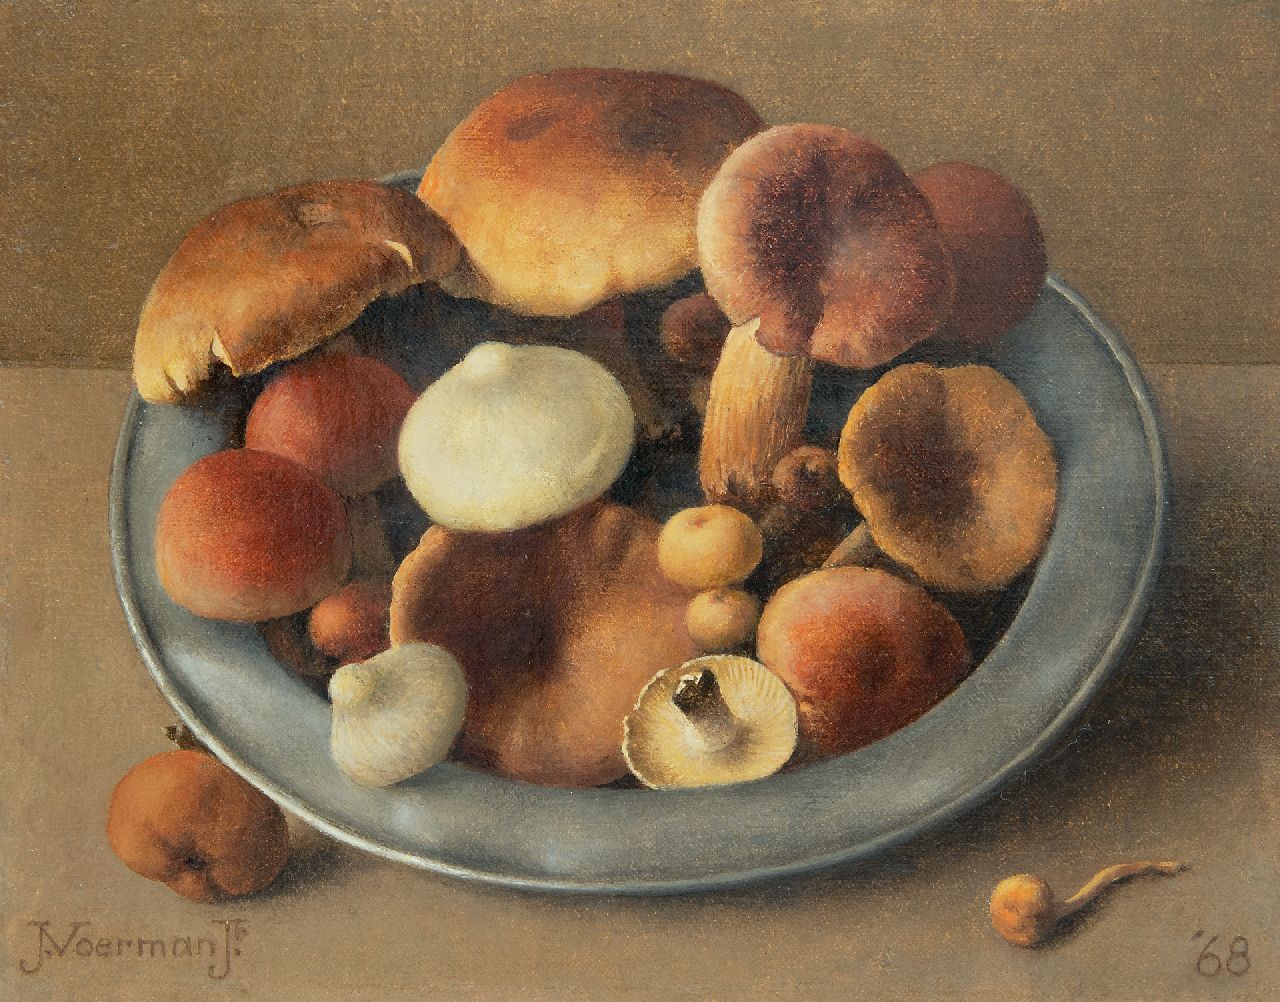 Voerman jr. J.  | Jan Voerman jr. | Paintings offered for sale | A pewter bowl with mushrooms, oil on canvas laid down on board 19.2 x 24.4 cm, signed l.l. and dated '68